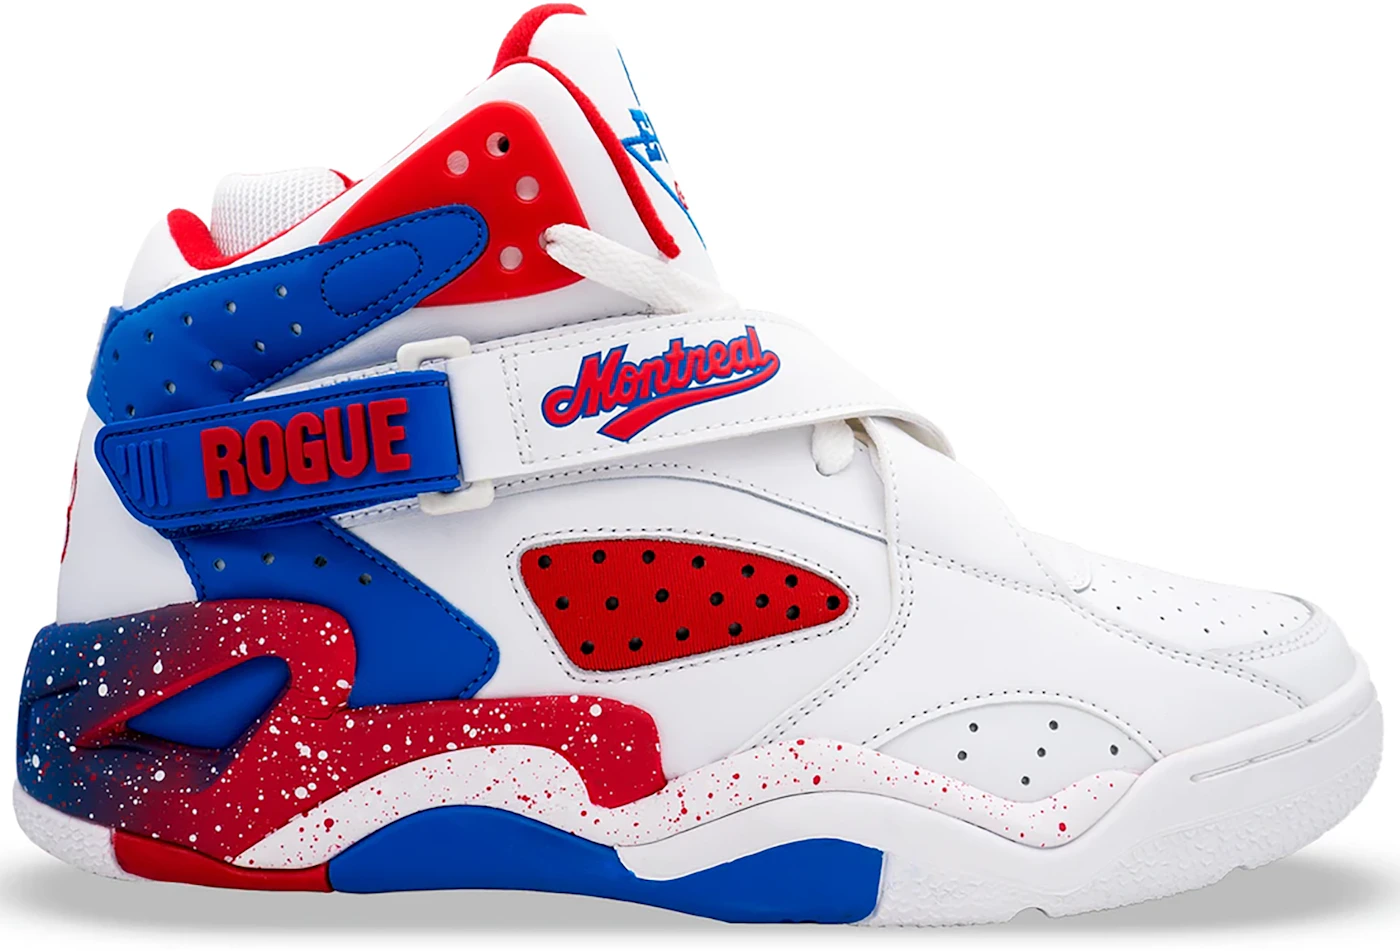 The Ewing Athletics Rogue Retro Releases This Month